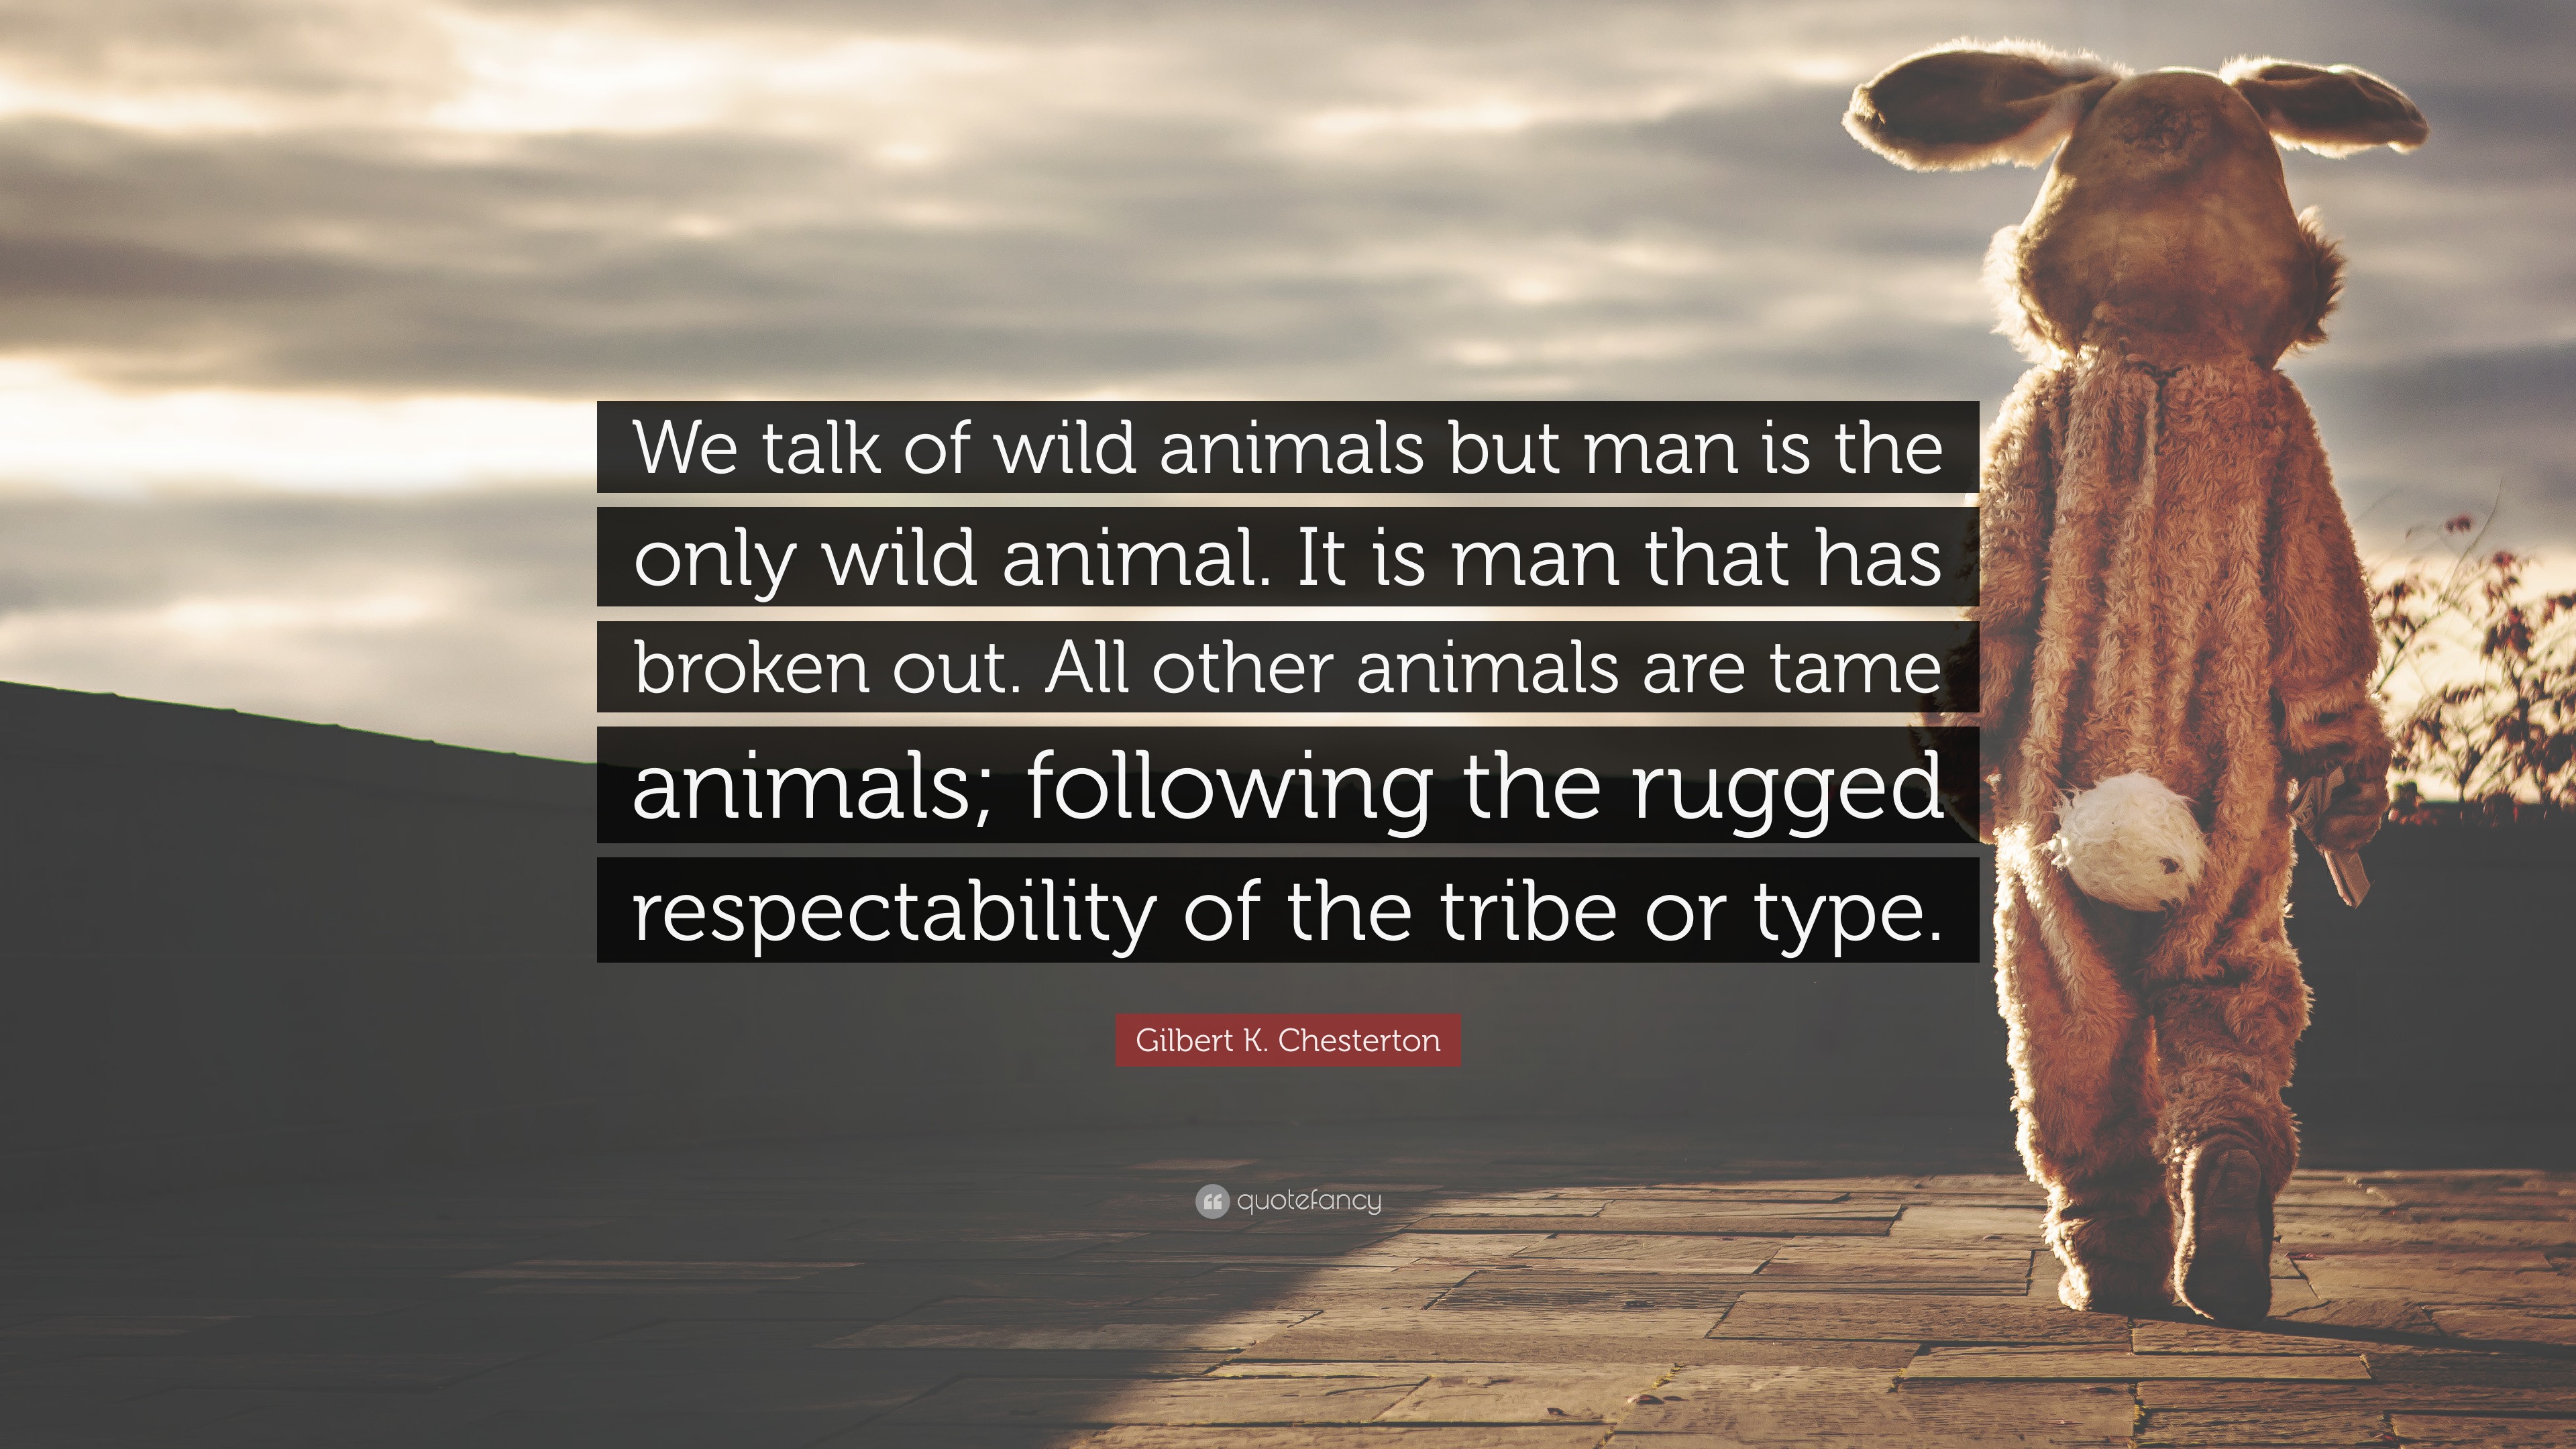 Gilbert K. Chesterton Quote: “We talk of wild animals but man is the only wild  animal. It is man that has broken out. All other animals are tame anima...”